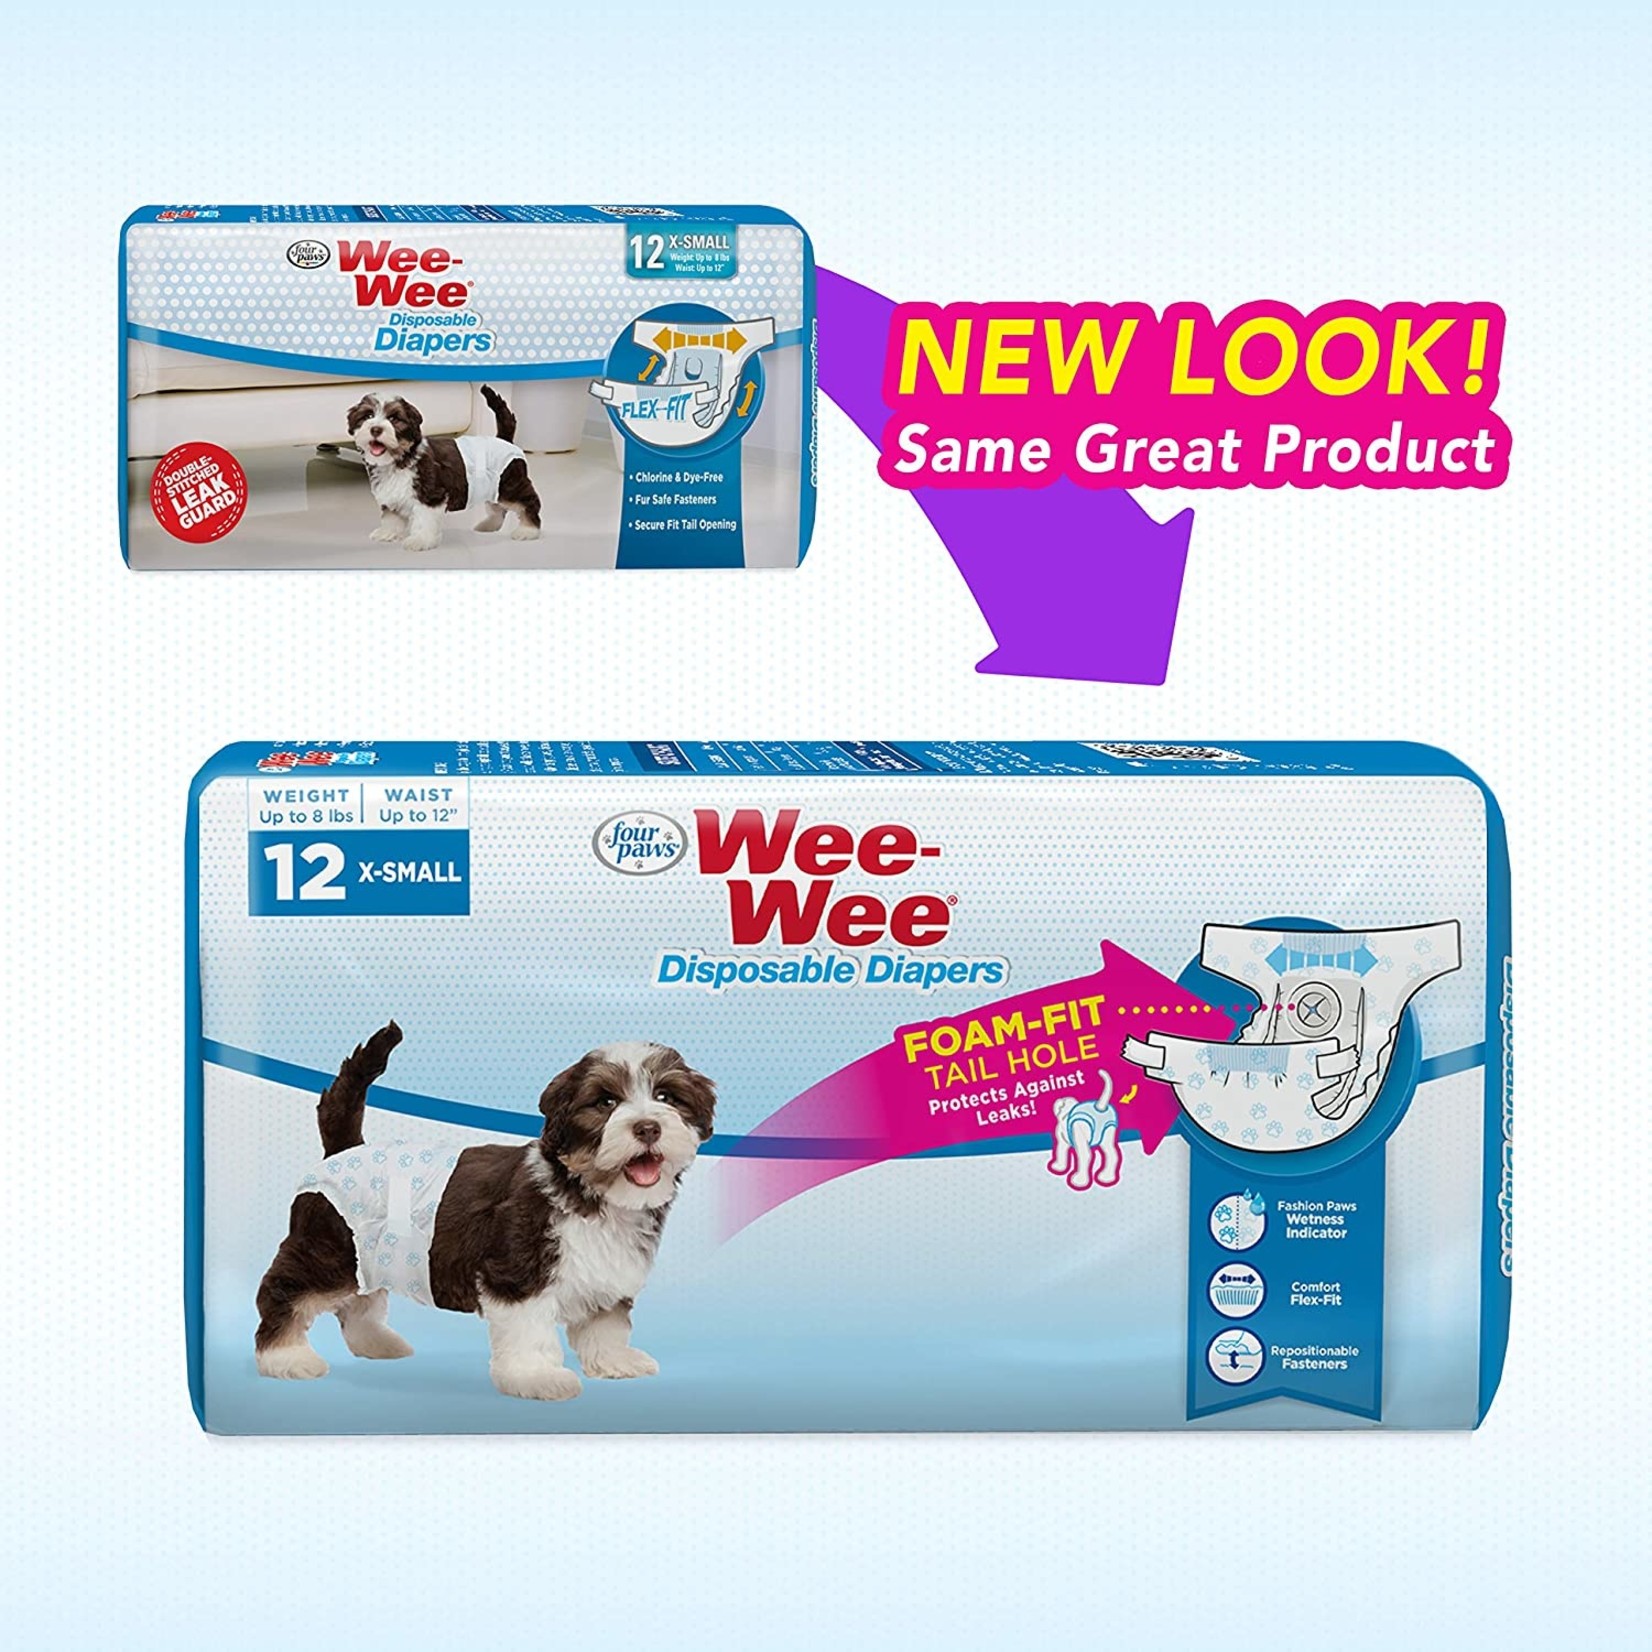 Four Paws Four Paws Wee Wee Diaper 12hr X-Small 12 count